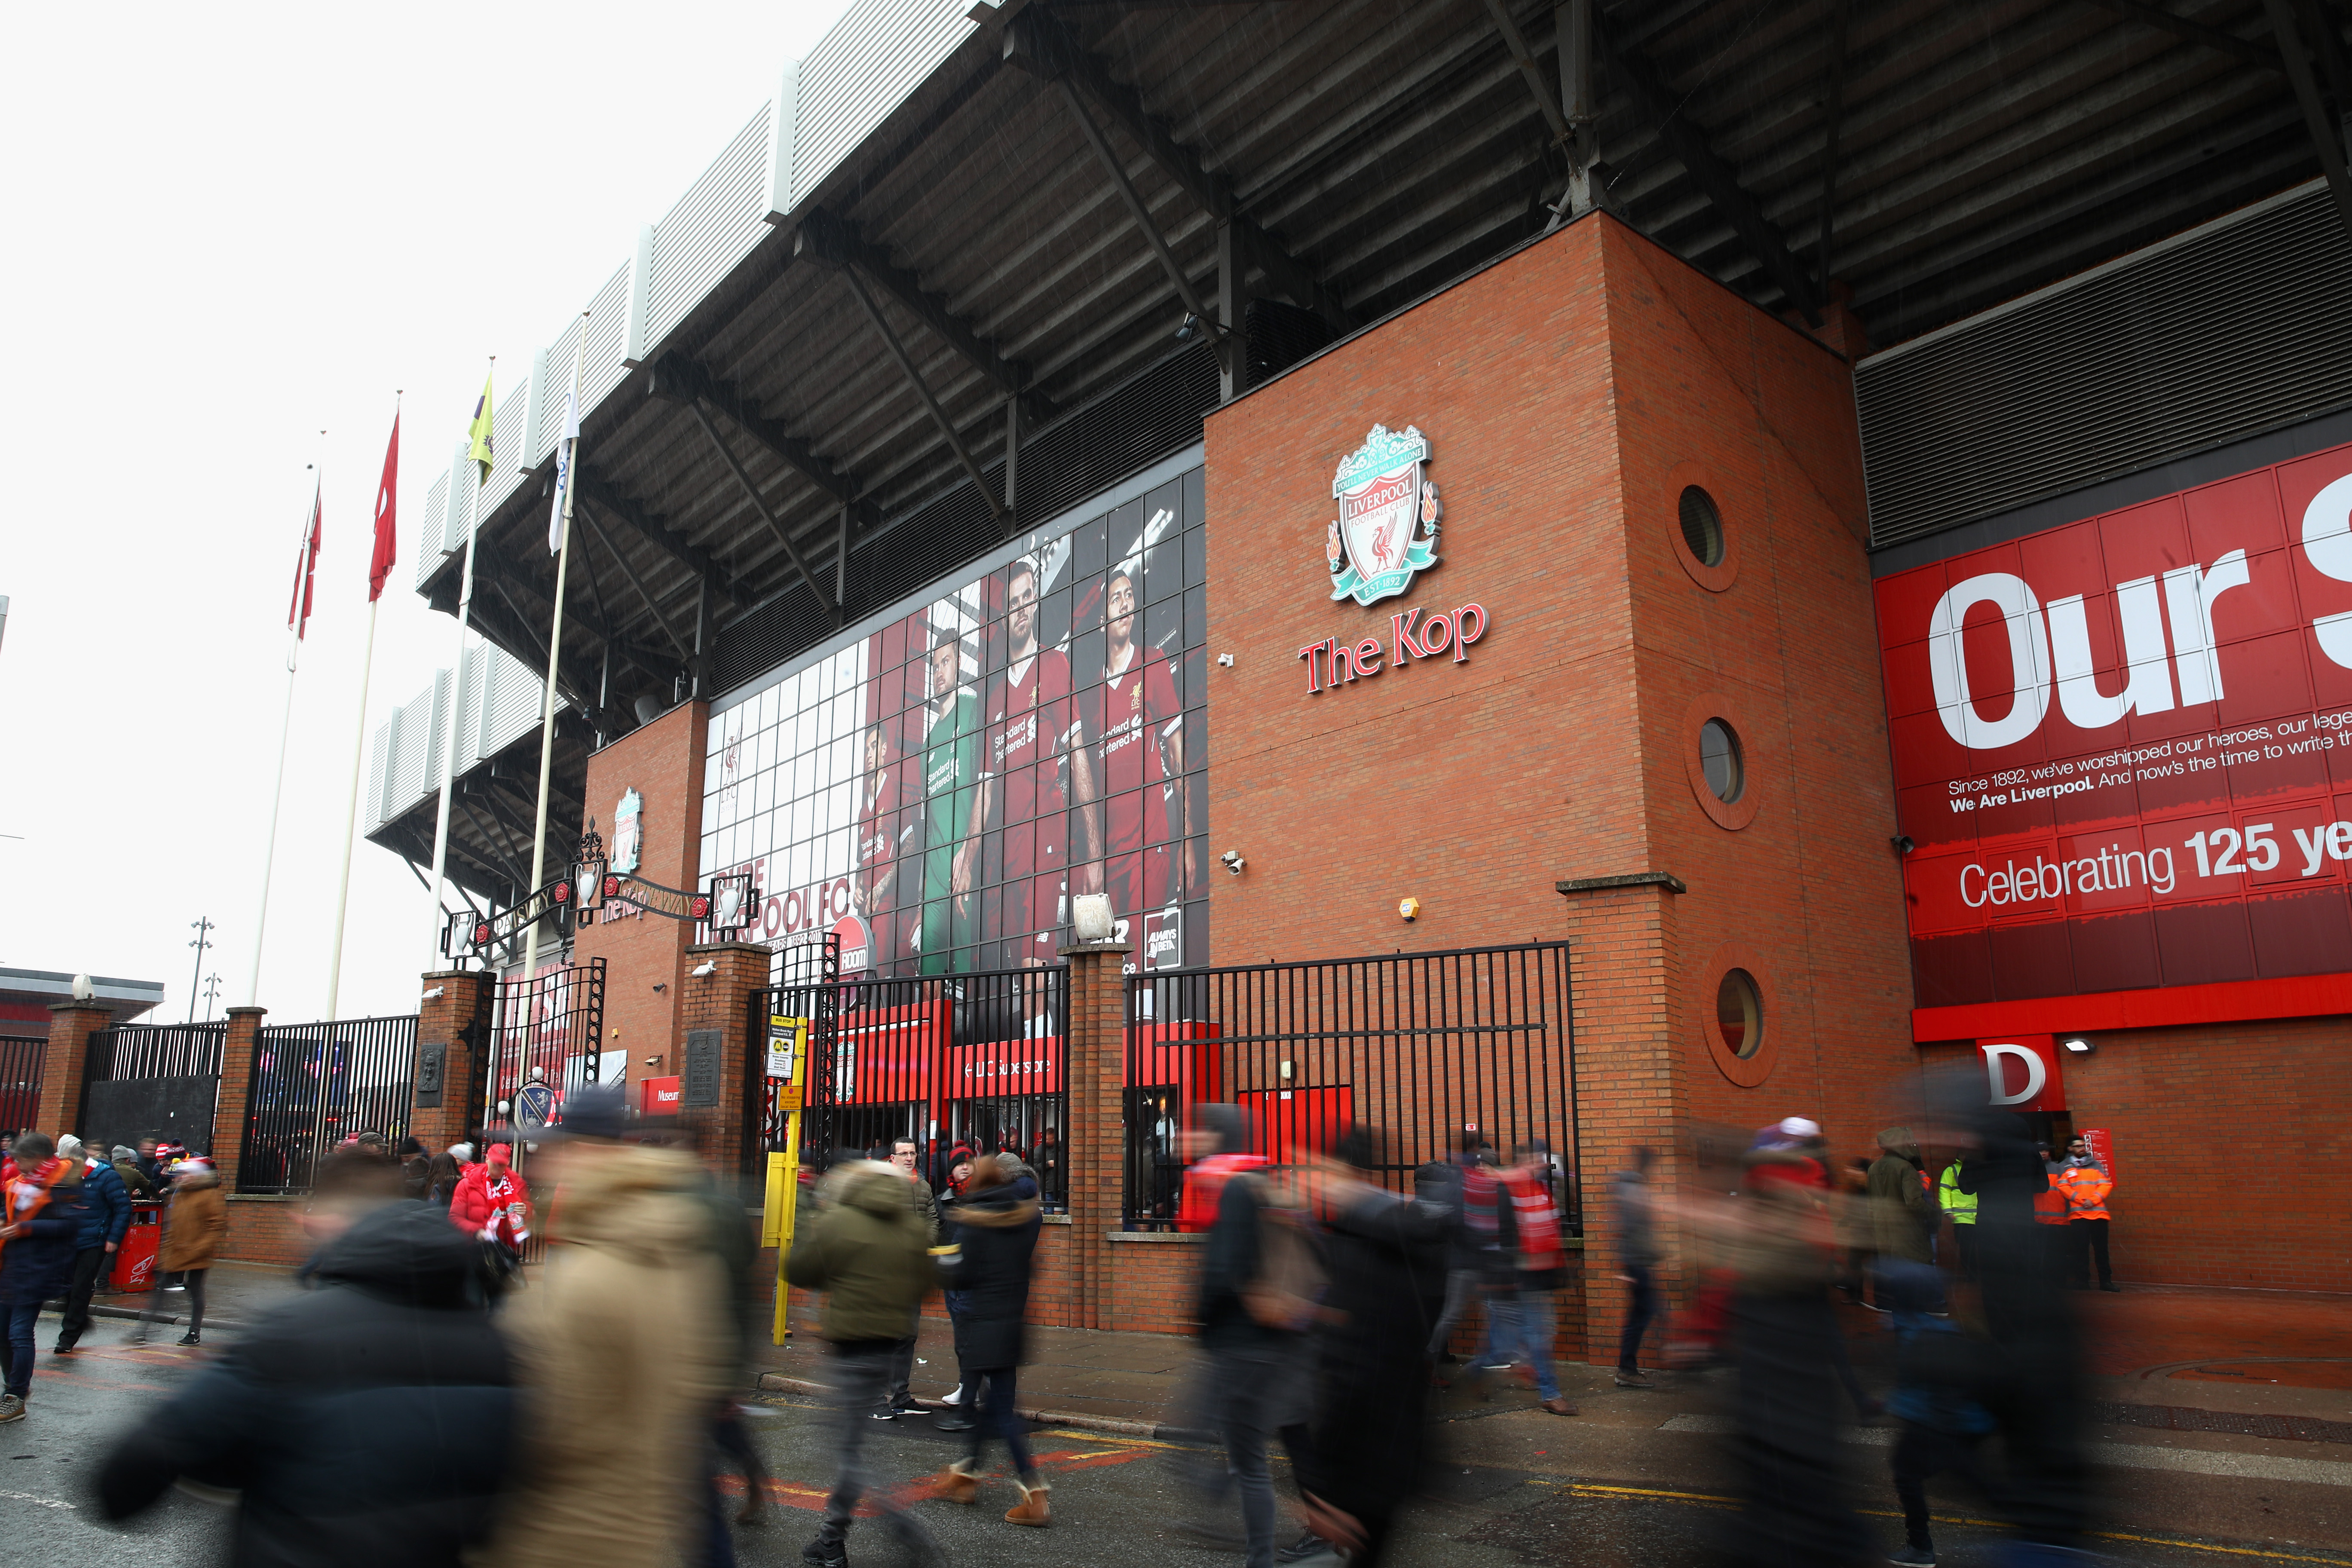 LIVERPOOL, ENGLAND - DECEMBER 10:  Fans arrive prior to the Premier League match between Liverpool and Everton at Anfield on December 10, 2017 in Liverpool, England.  (Photo by Clive Brunskill/Getty Images)